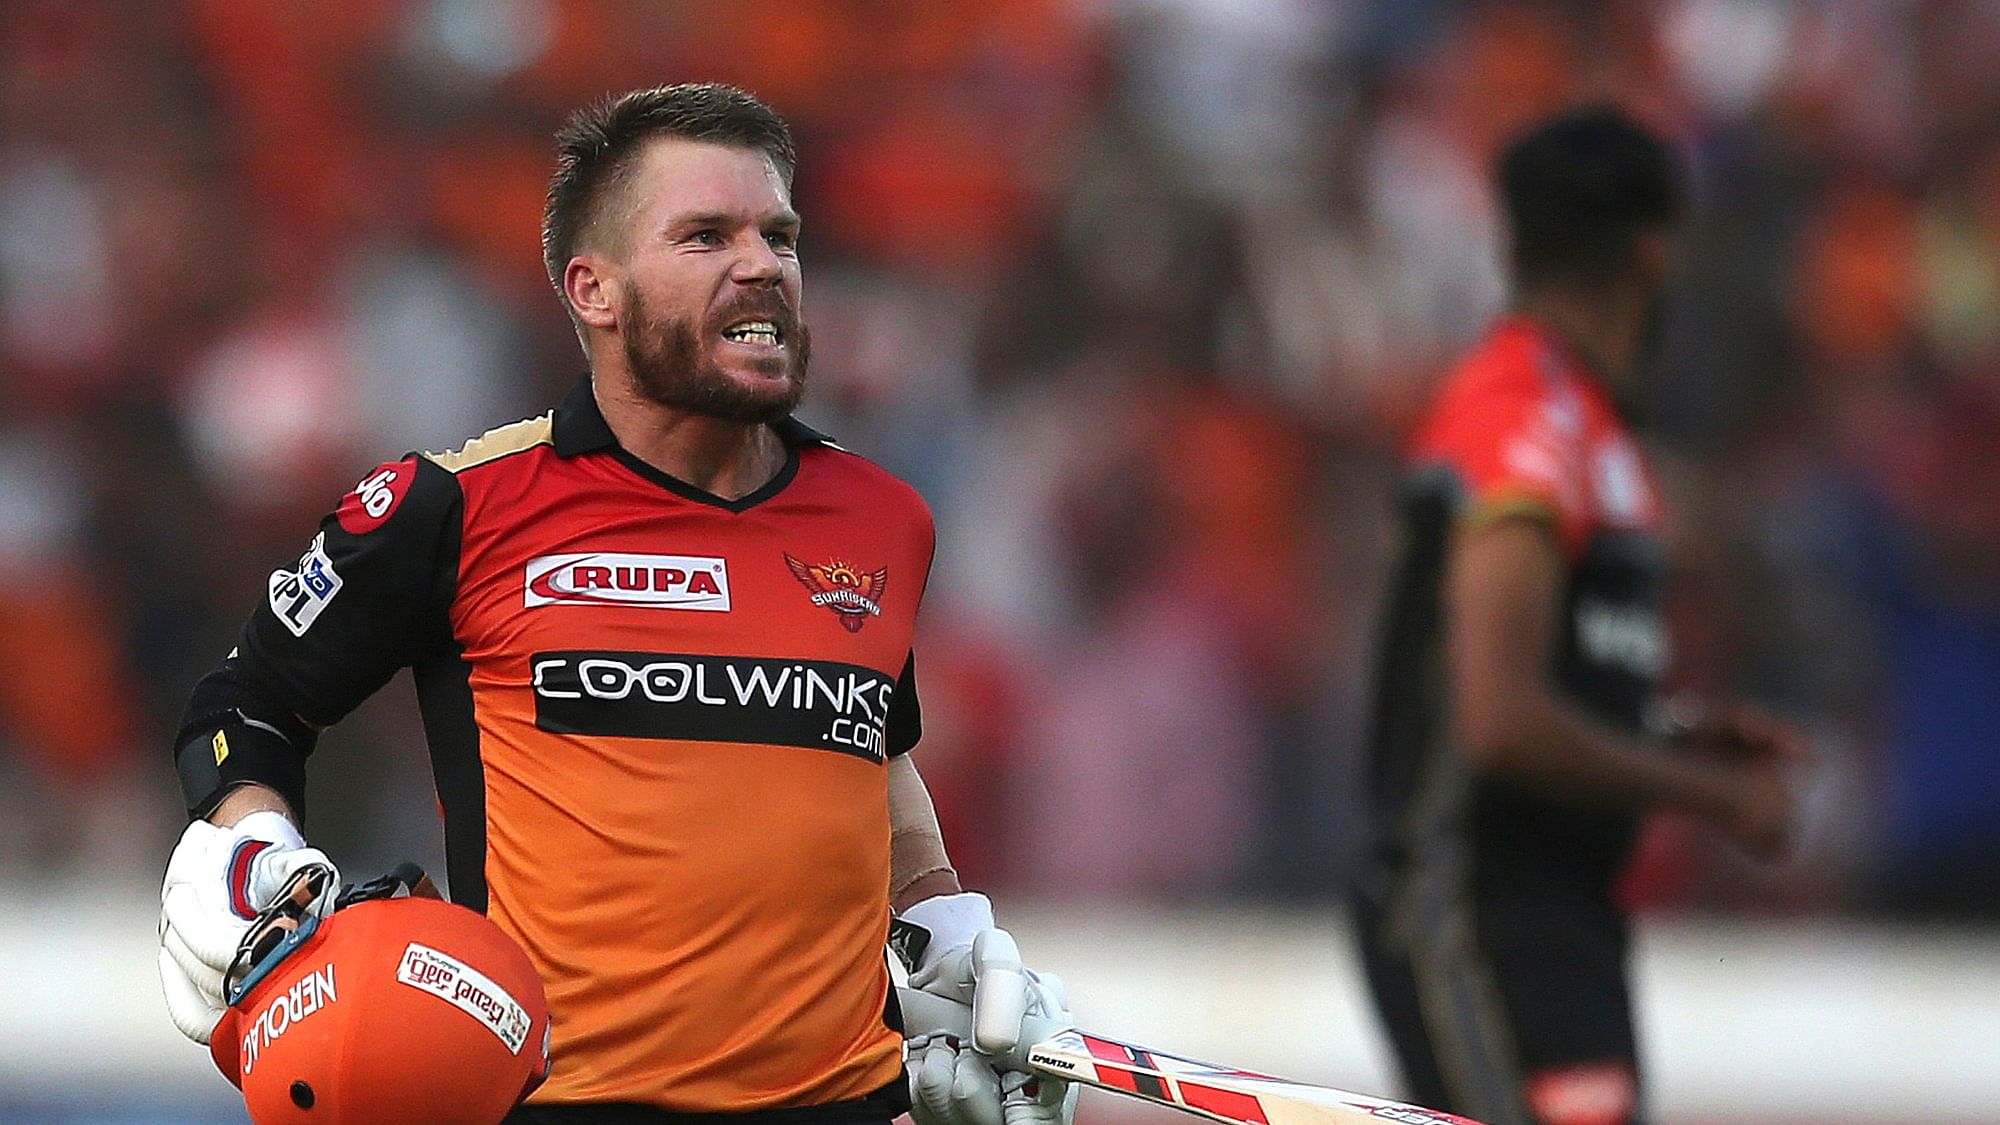 David Warner finished his IPL 2019 campaign with 692 runs in 12 matches.